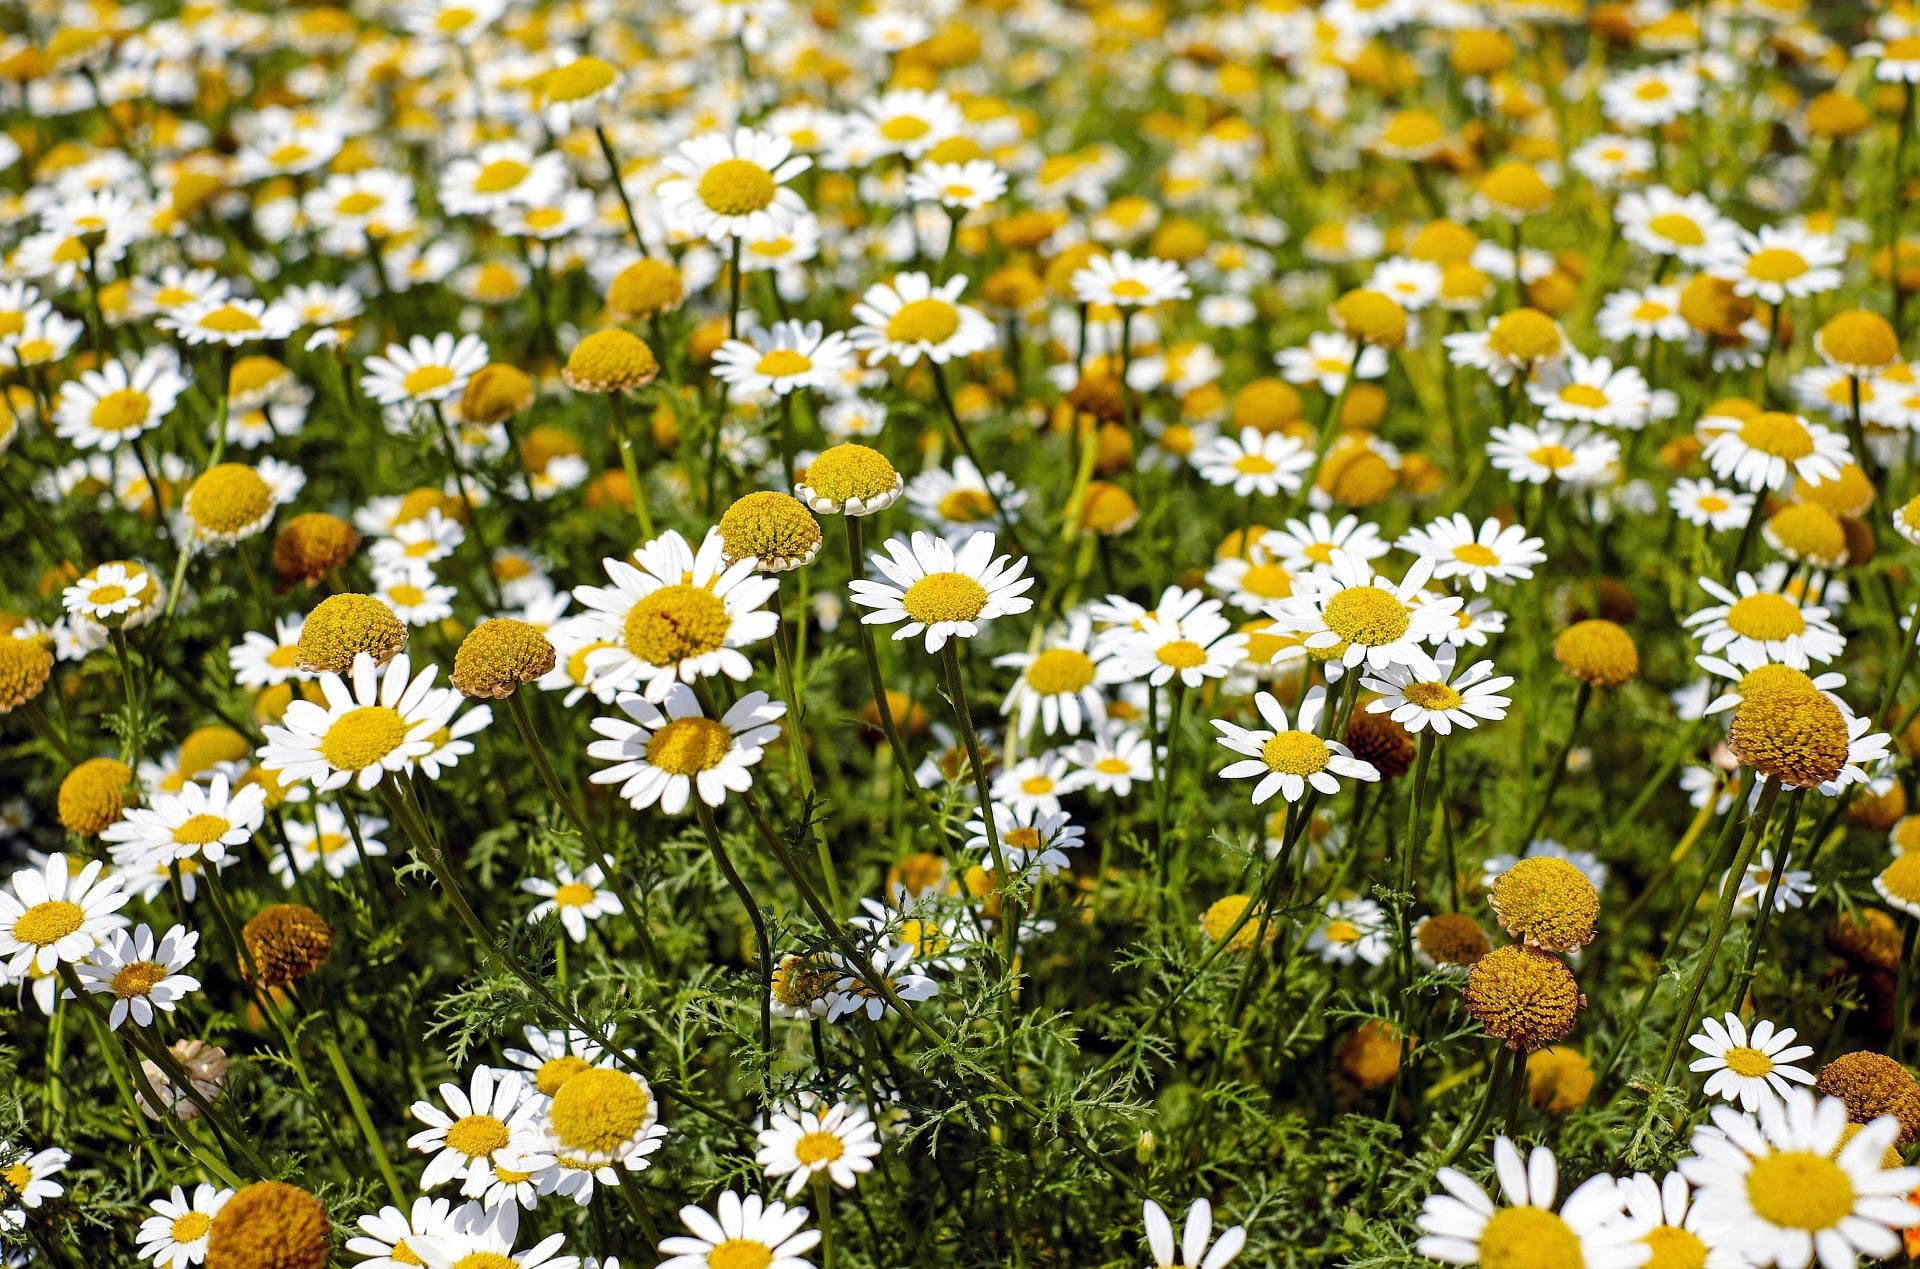 chamomile is also a great option to naturally lighten your hair. (Image via Pexels / Pixababy)